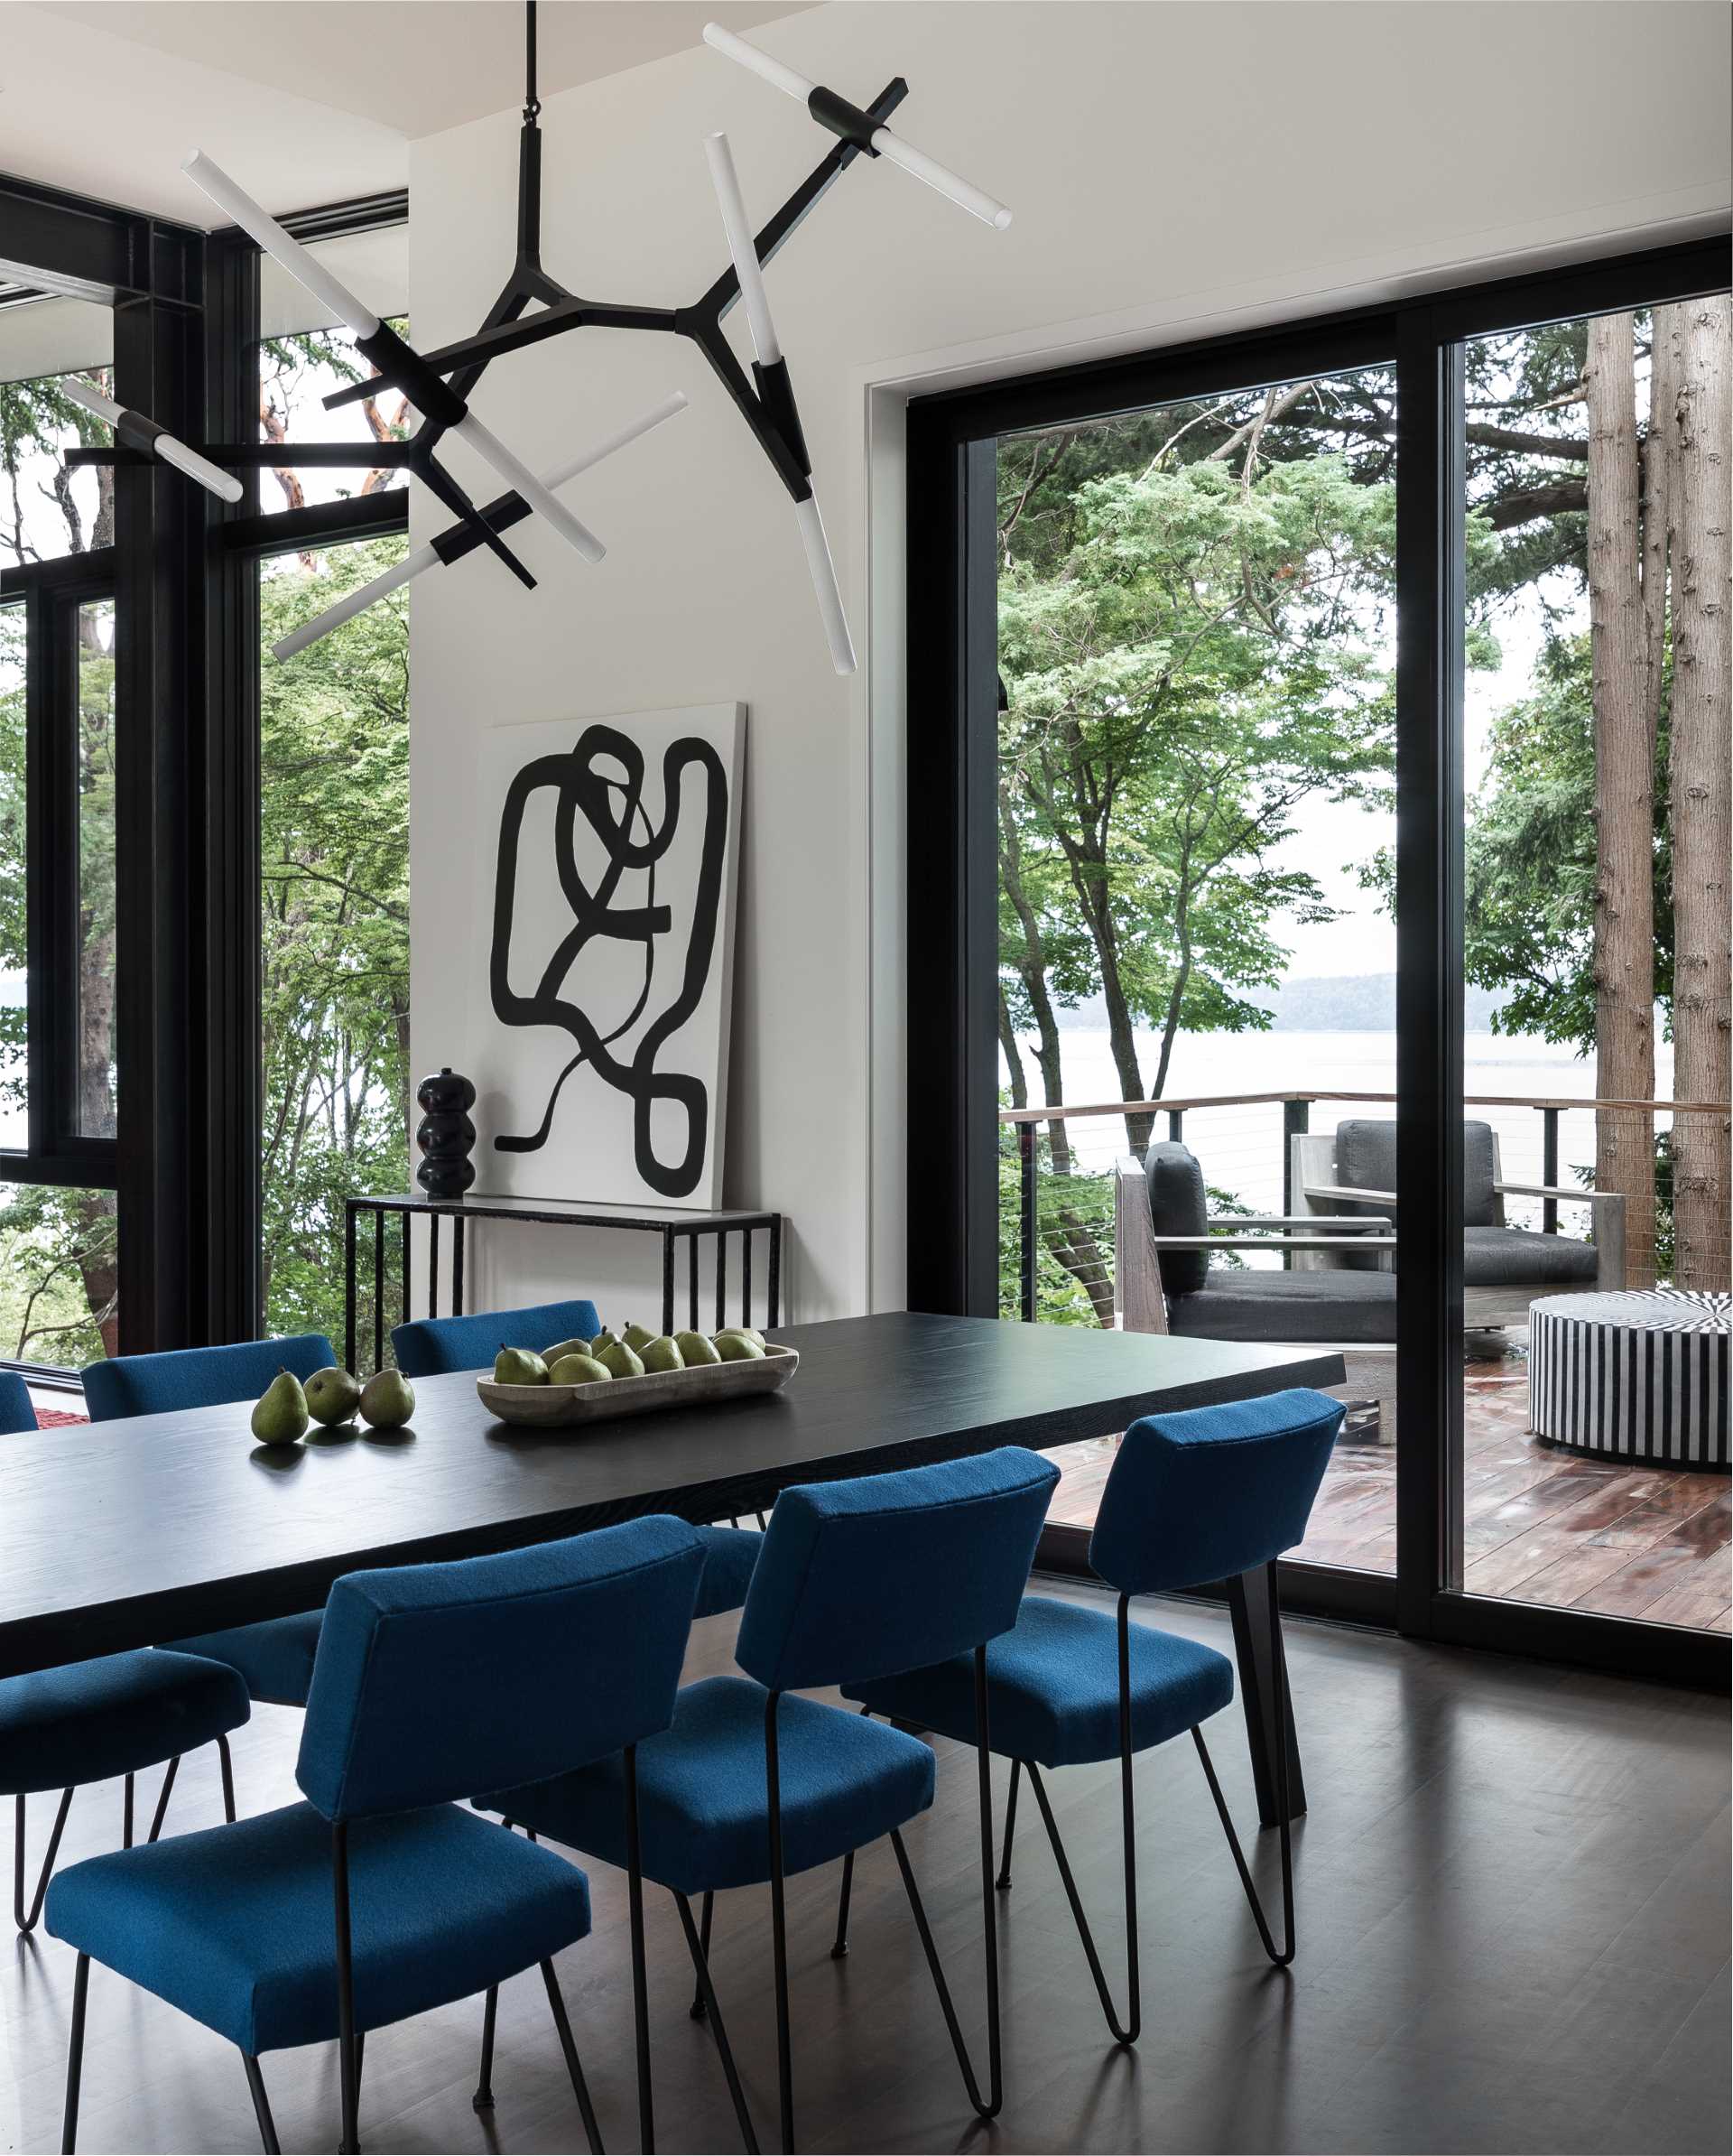 A modern dining room with blue dining chairs with a minimalist metal frame.